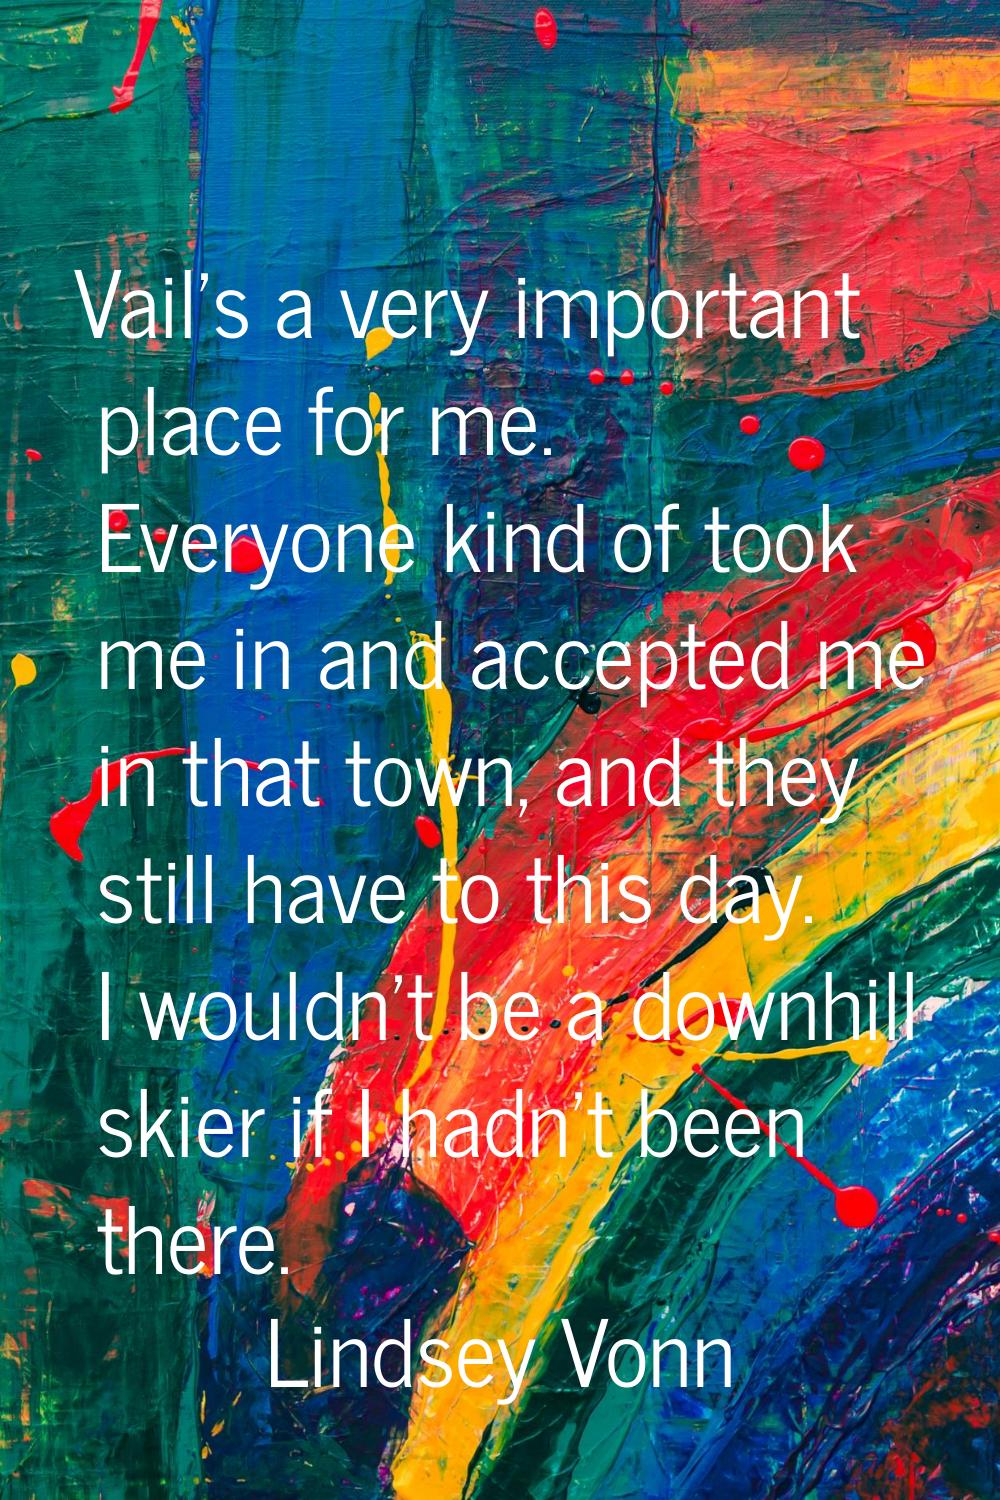 Vail's a very important place for me. Everyone kind of took me in and accepted me in that town, and